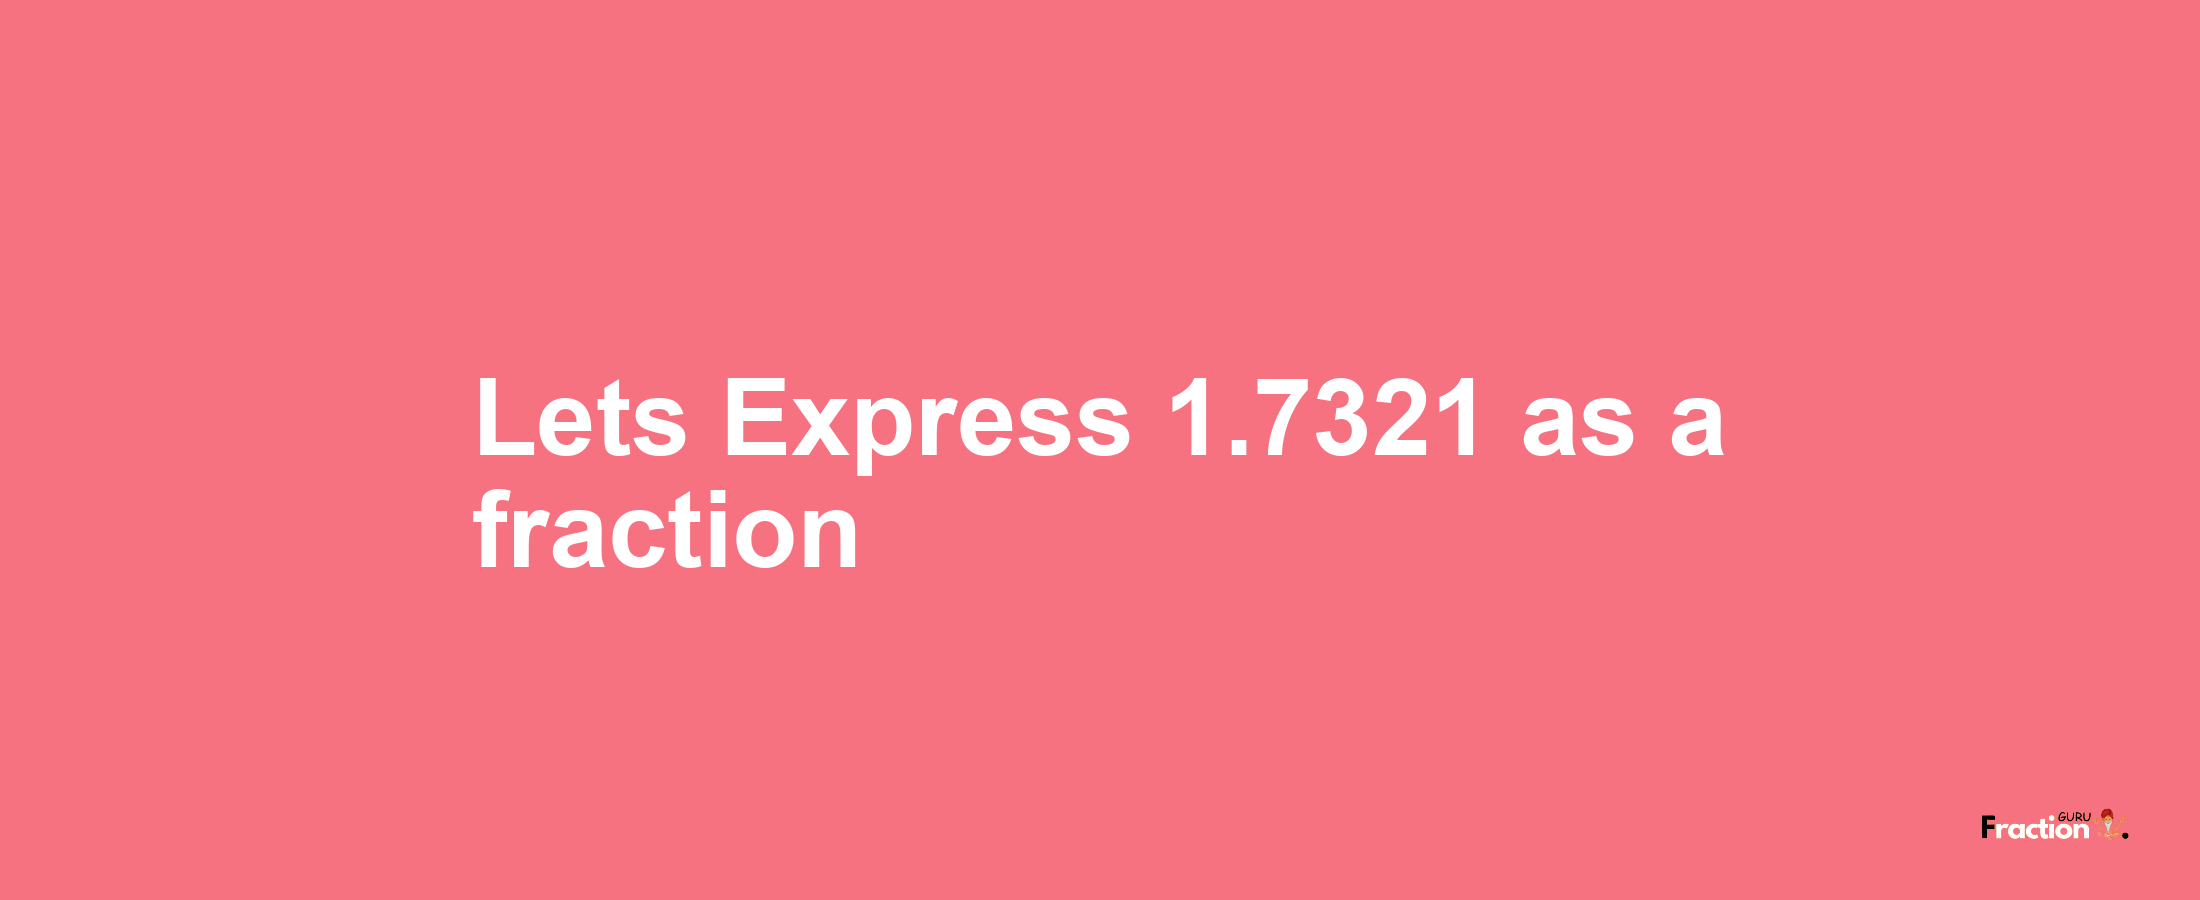 Lets Express 1.7321 as afraction